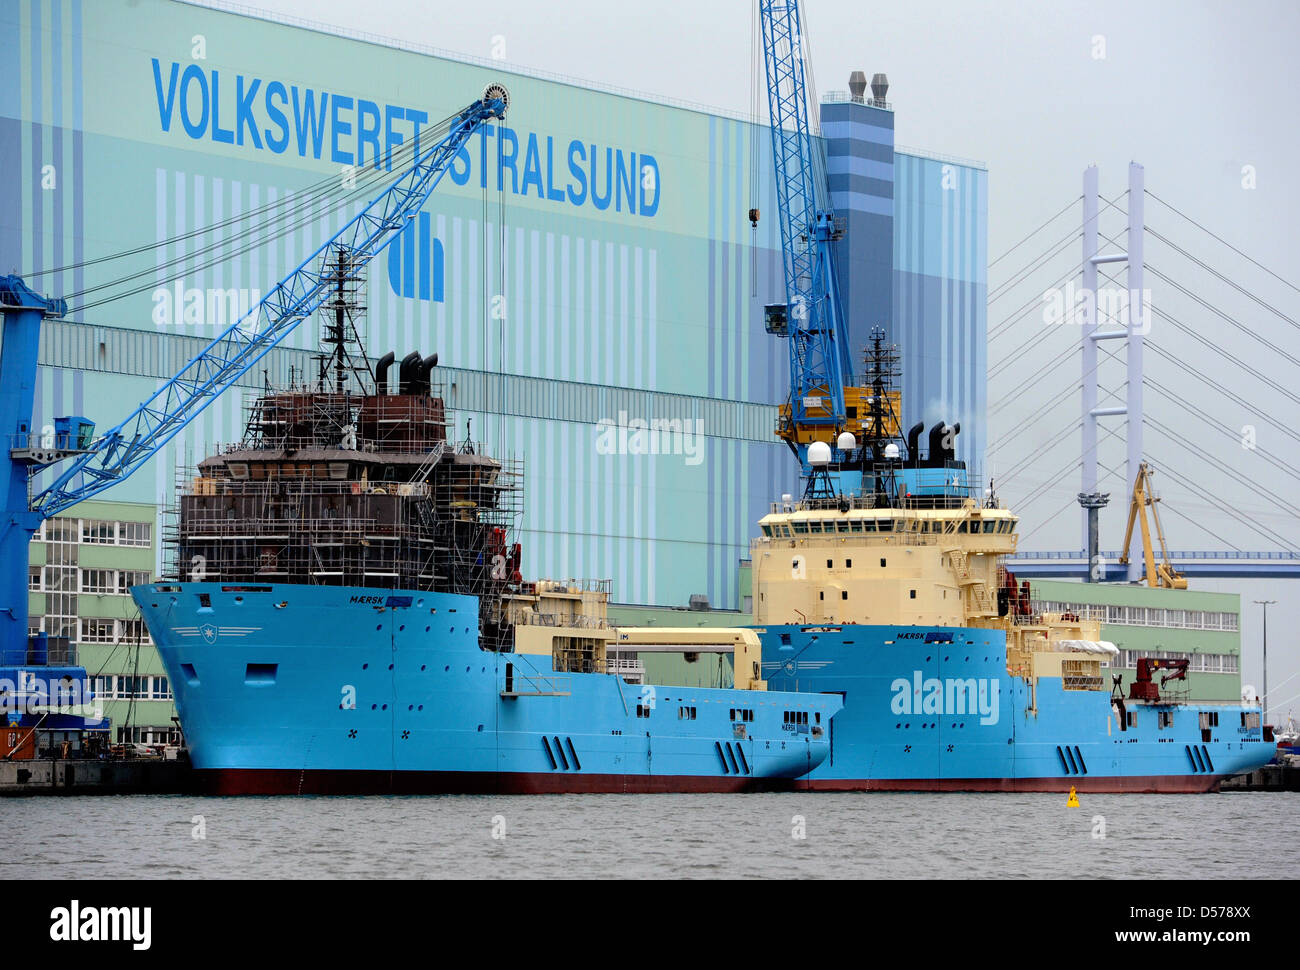 Two new anchor handling tug supply vessels (AHTS) lie towed at Volkswerft Stralsund shipbuilding company in Stralsund, Germany, 20 April 2010. The ships were built for world's biggest container ship shipowning company Maersk and will be used for mooring of deep-sea drilling platforms and the offshore sector. Photo: Stefan Sauer Stock Photo